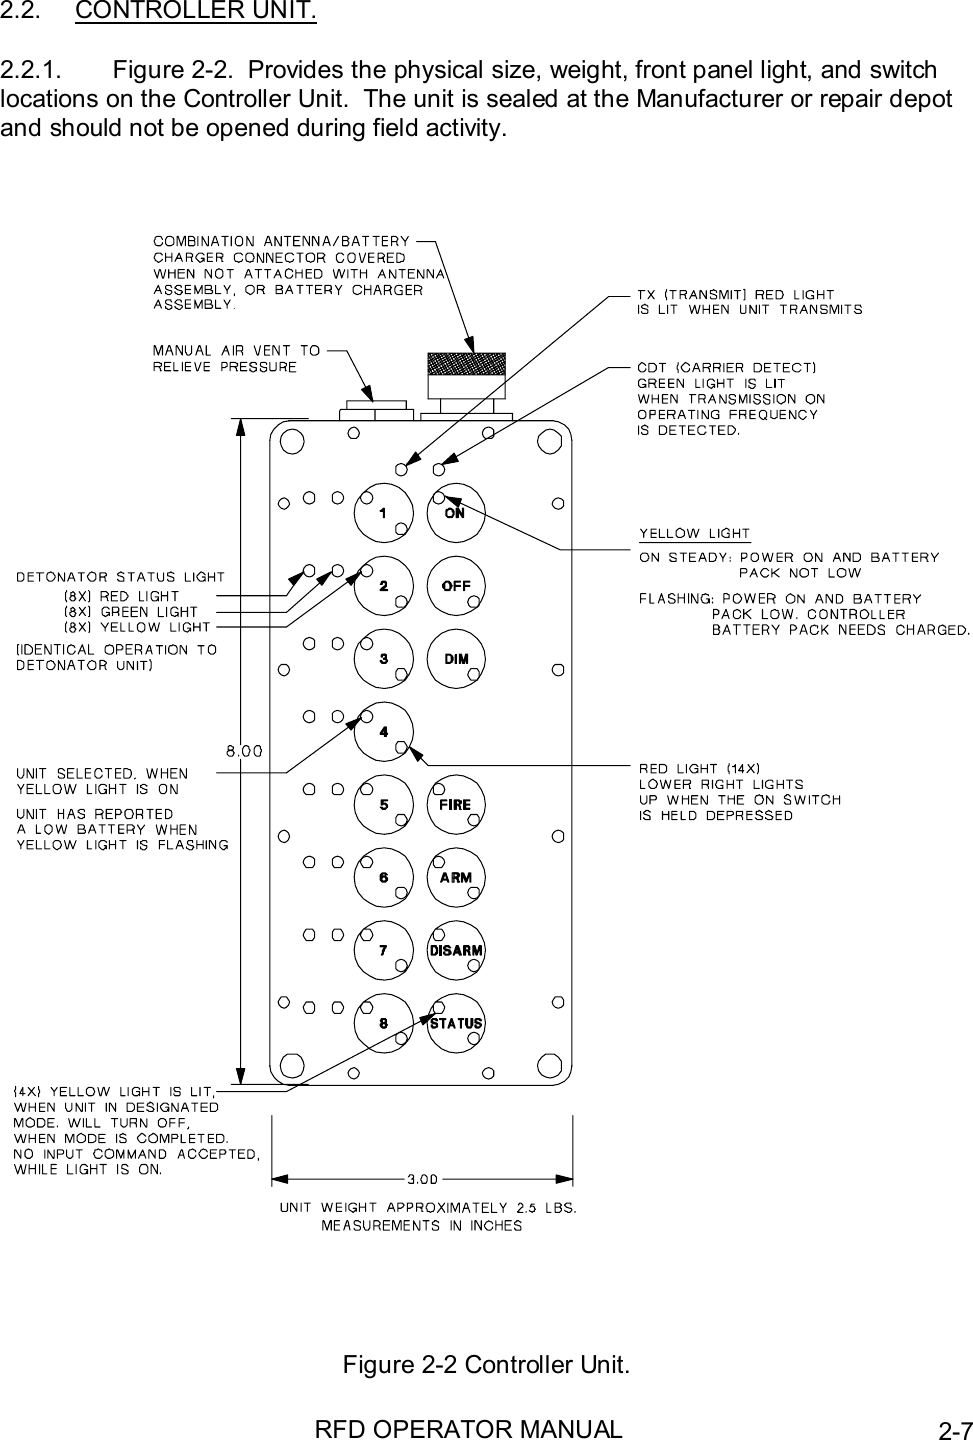 RFD OPERATOR MANUAL 2-72.2. CONTROLLER UNIT.2.2.1.  Figure 2-2.  Provides the physical size, weight, front panel light, and switchlocations on the Controller Unit.  The unit is sealed at the Manufacturer or repair depotand should not be opened during field activity.Figure 2-2 Controller Unit.